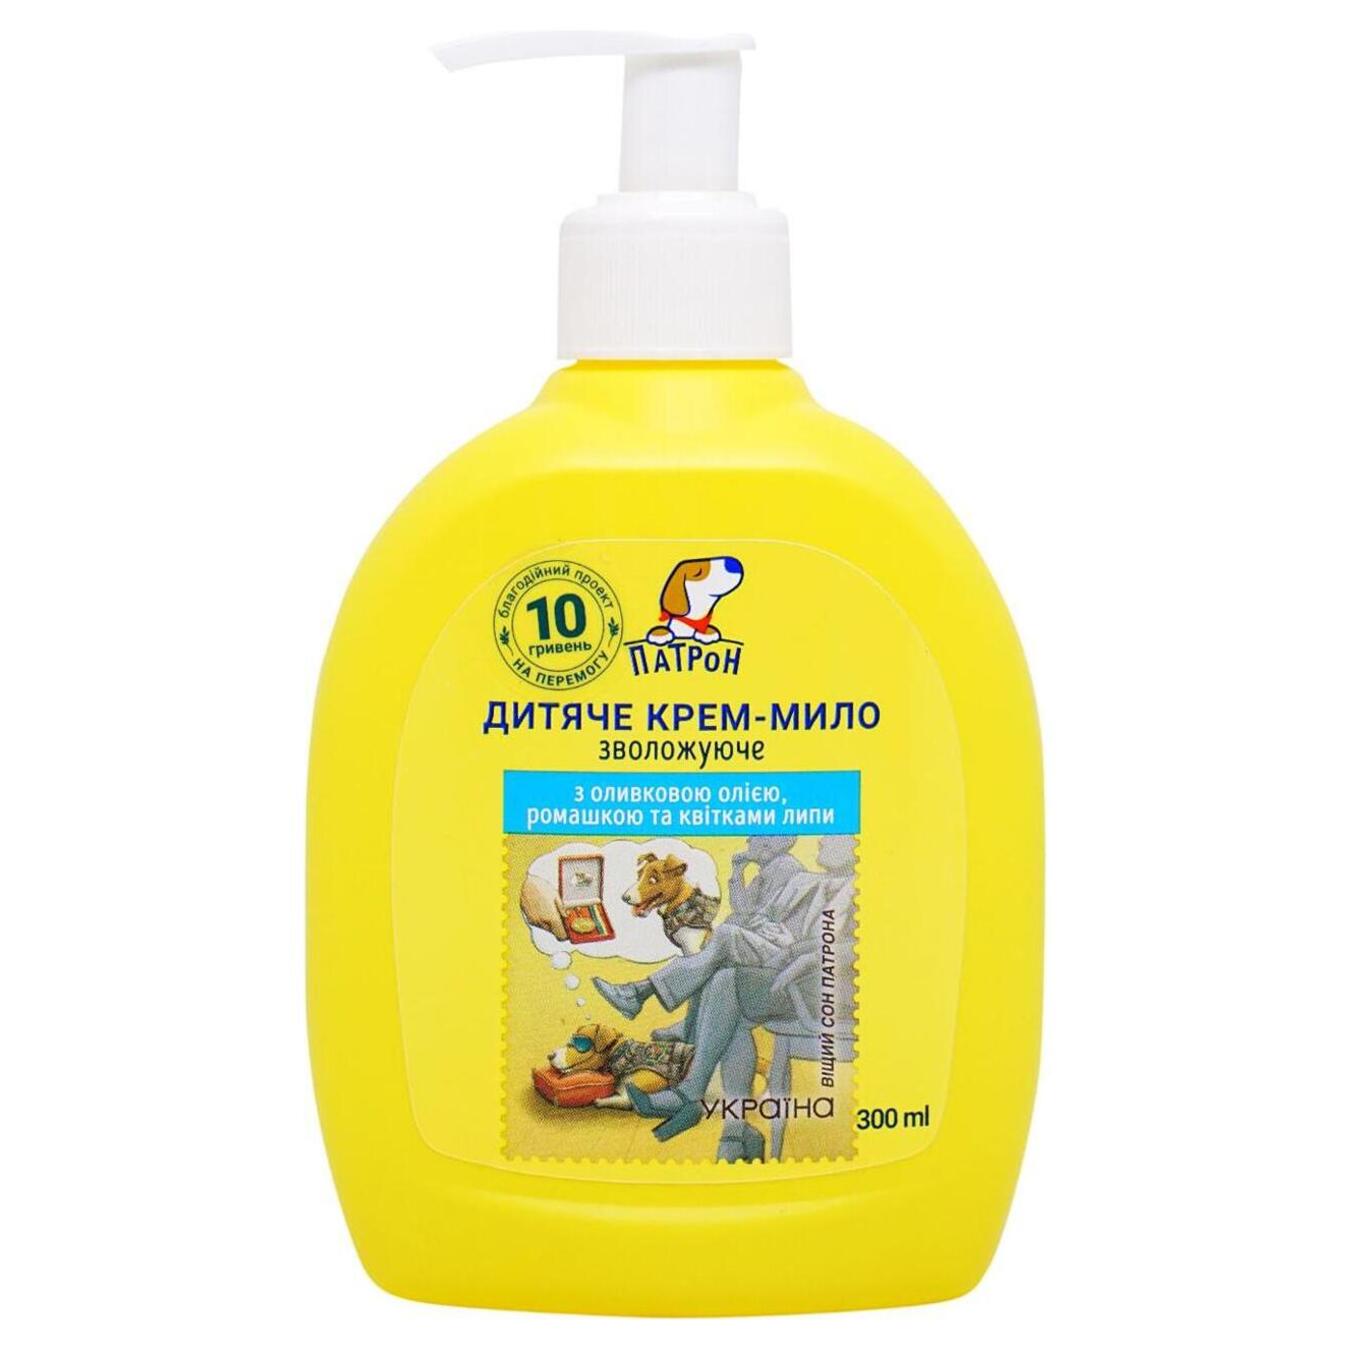 Children's cream-soap Pes Patron moisturizing with olive oil, chamomile and linden flowers 300ml